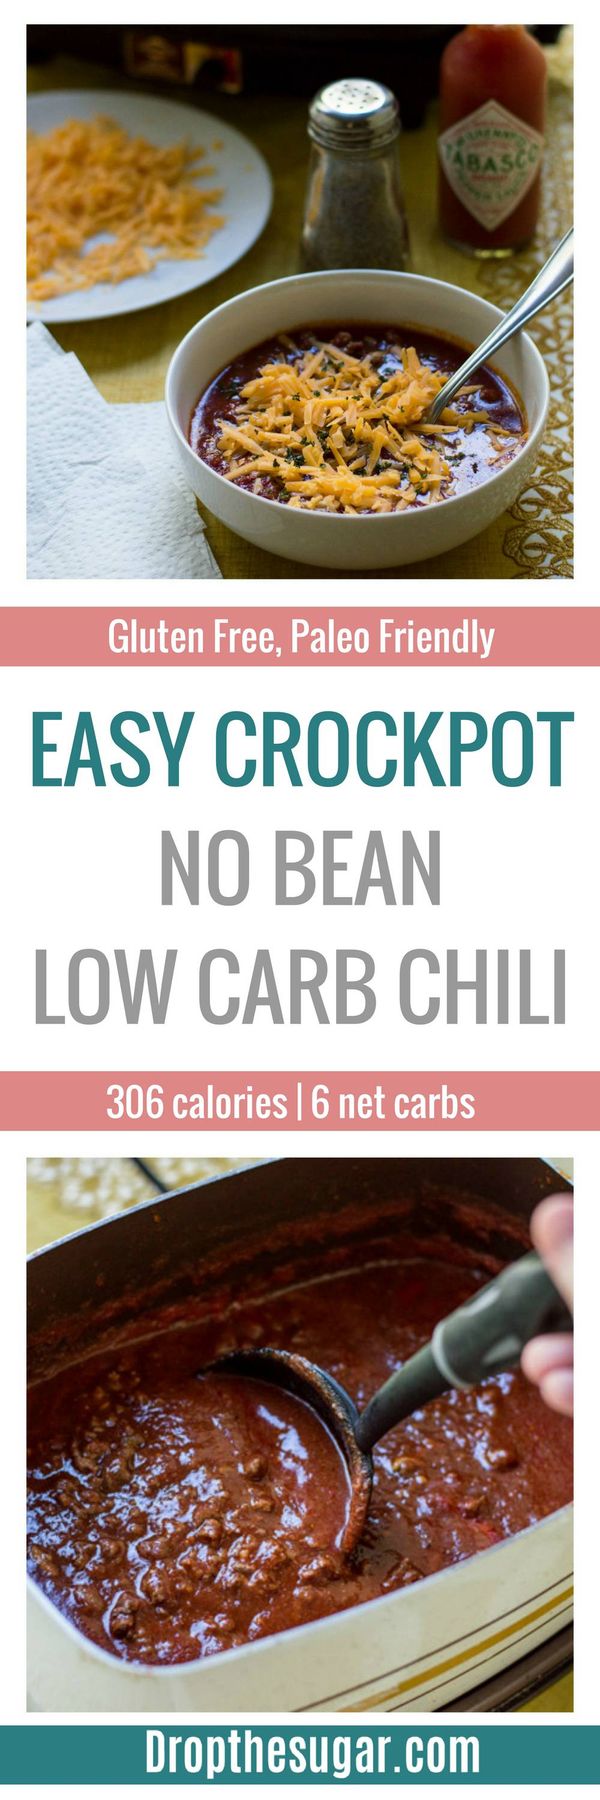 Easy Crockpot No Bean Low Carb Chili